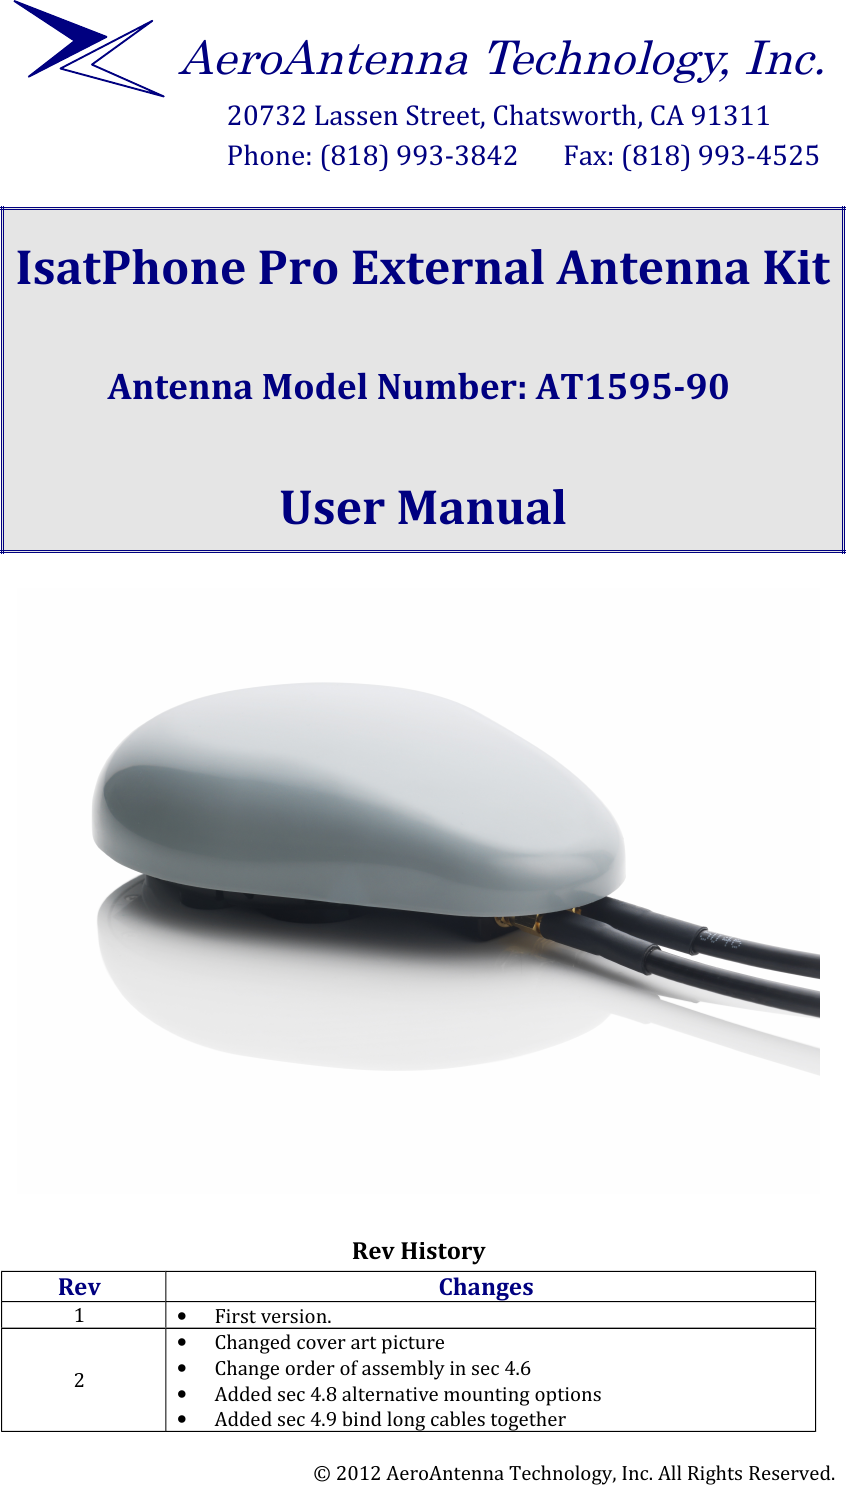 20732 Lassen Street, Chatsworth, CA 91311Phone: (818) 993-3842       Fax: (818) 993-4525 IsatPhone Pro External Antenna KitAntenna Model Number: AT1595-90 User Manual Rev HistoryRev Changes1•First version. 2•Changed cover art picture•Change order of assembly in sec 4.6•Added sec 4.8 alternative mounting options•Added sec 4.9 bind long cables together© 2012 AeroAntenna Technology, Inc. All Rights Reserved.AeroAntenna Technology, Inc.